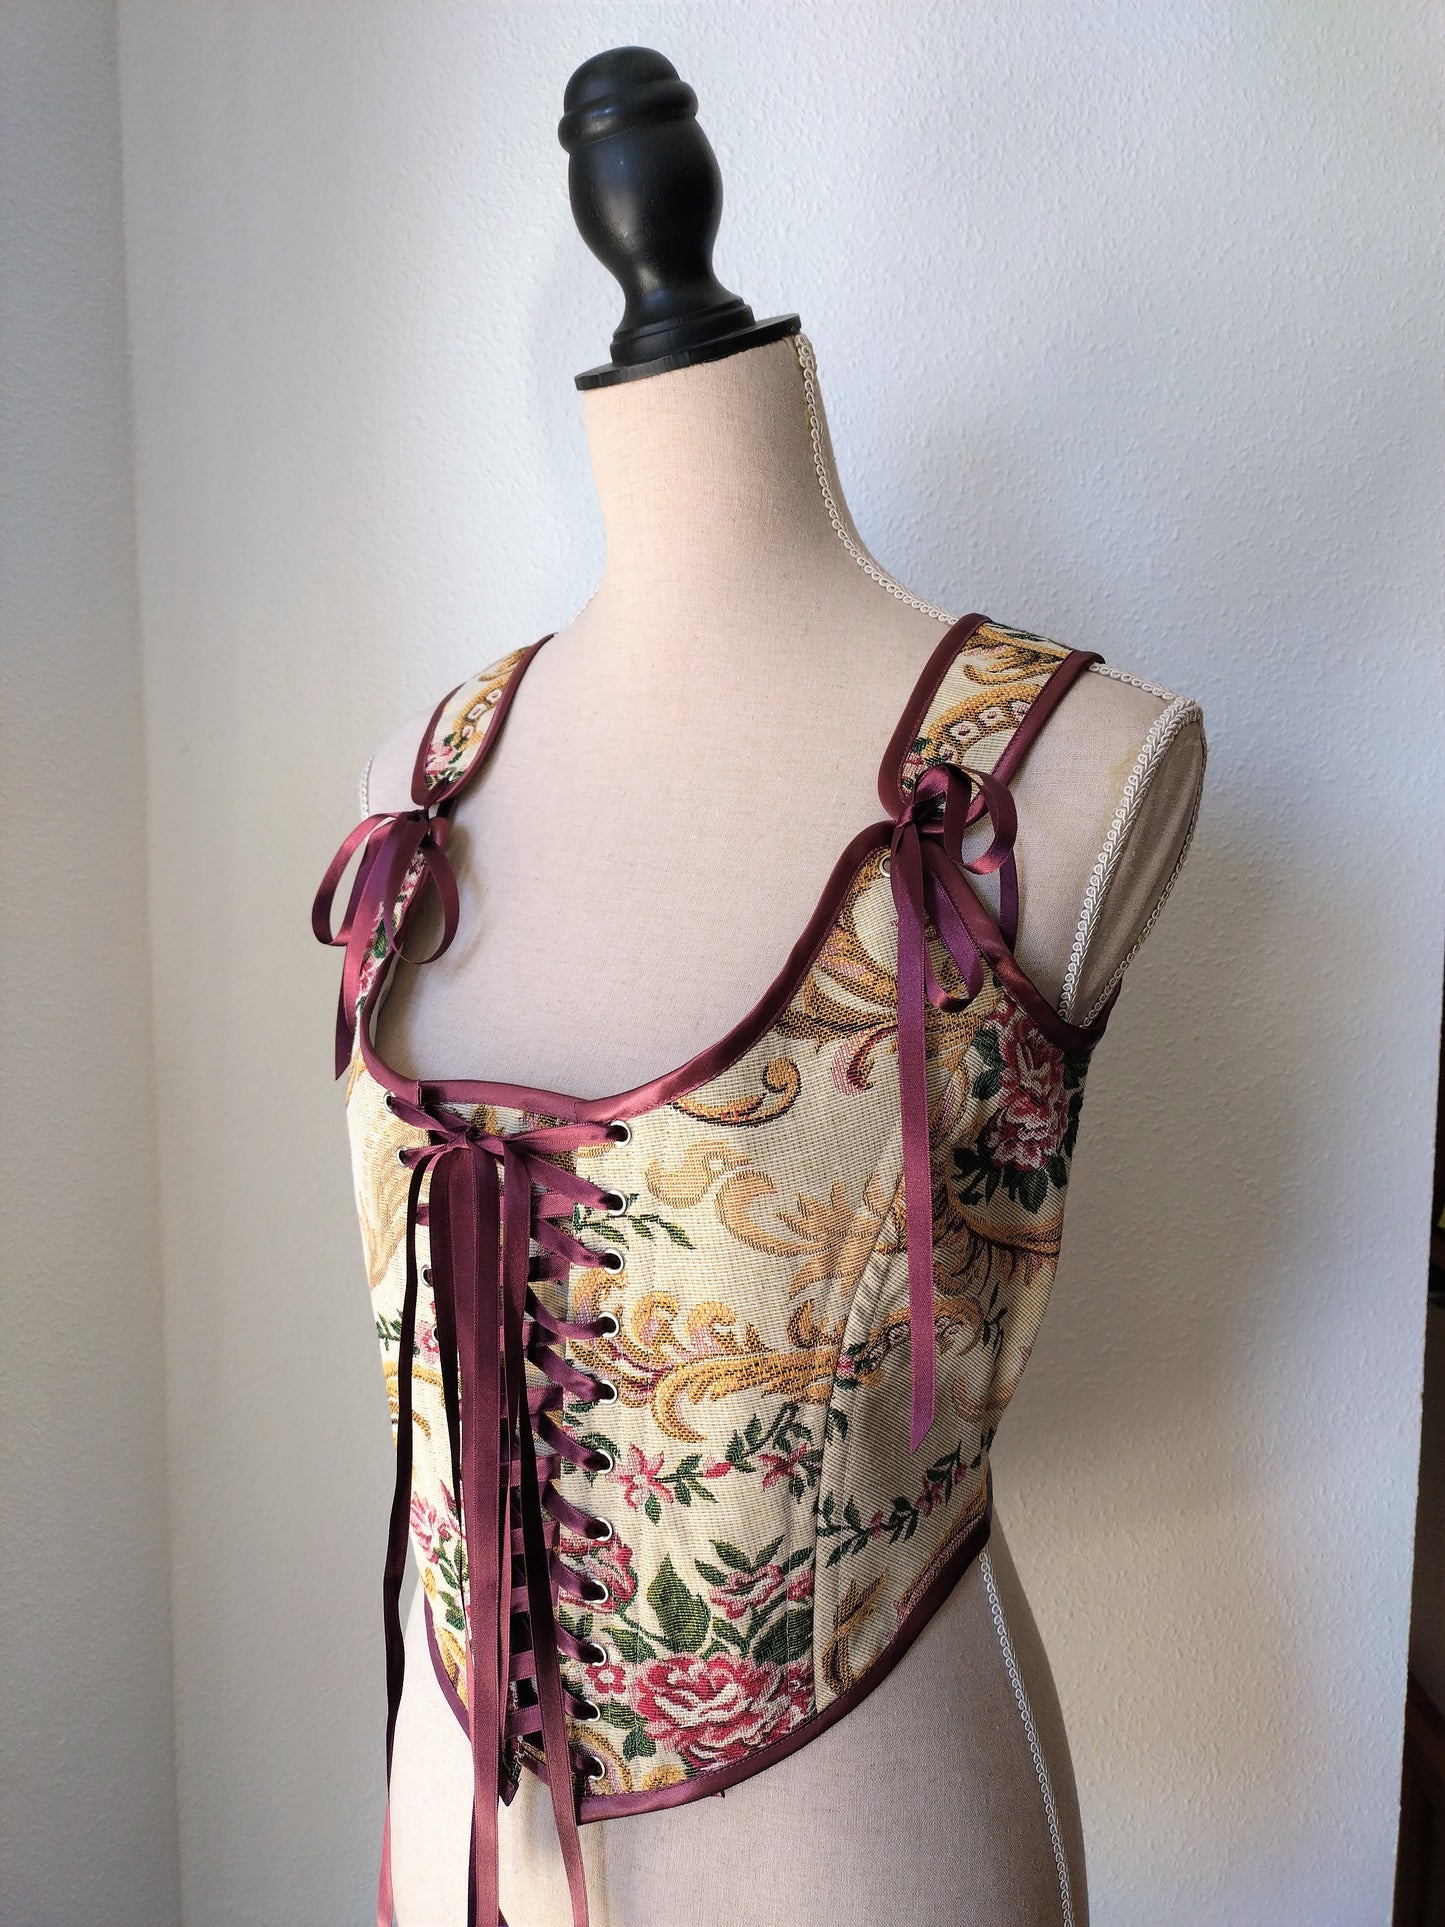 Tapestry corset stays